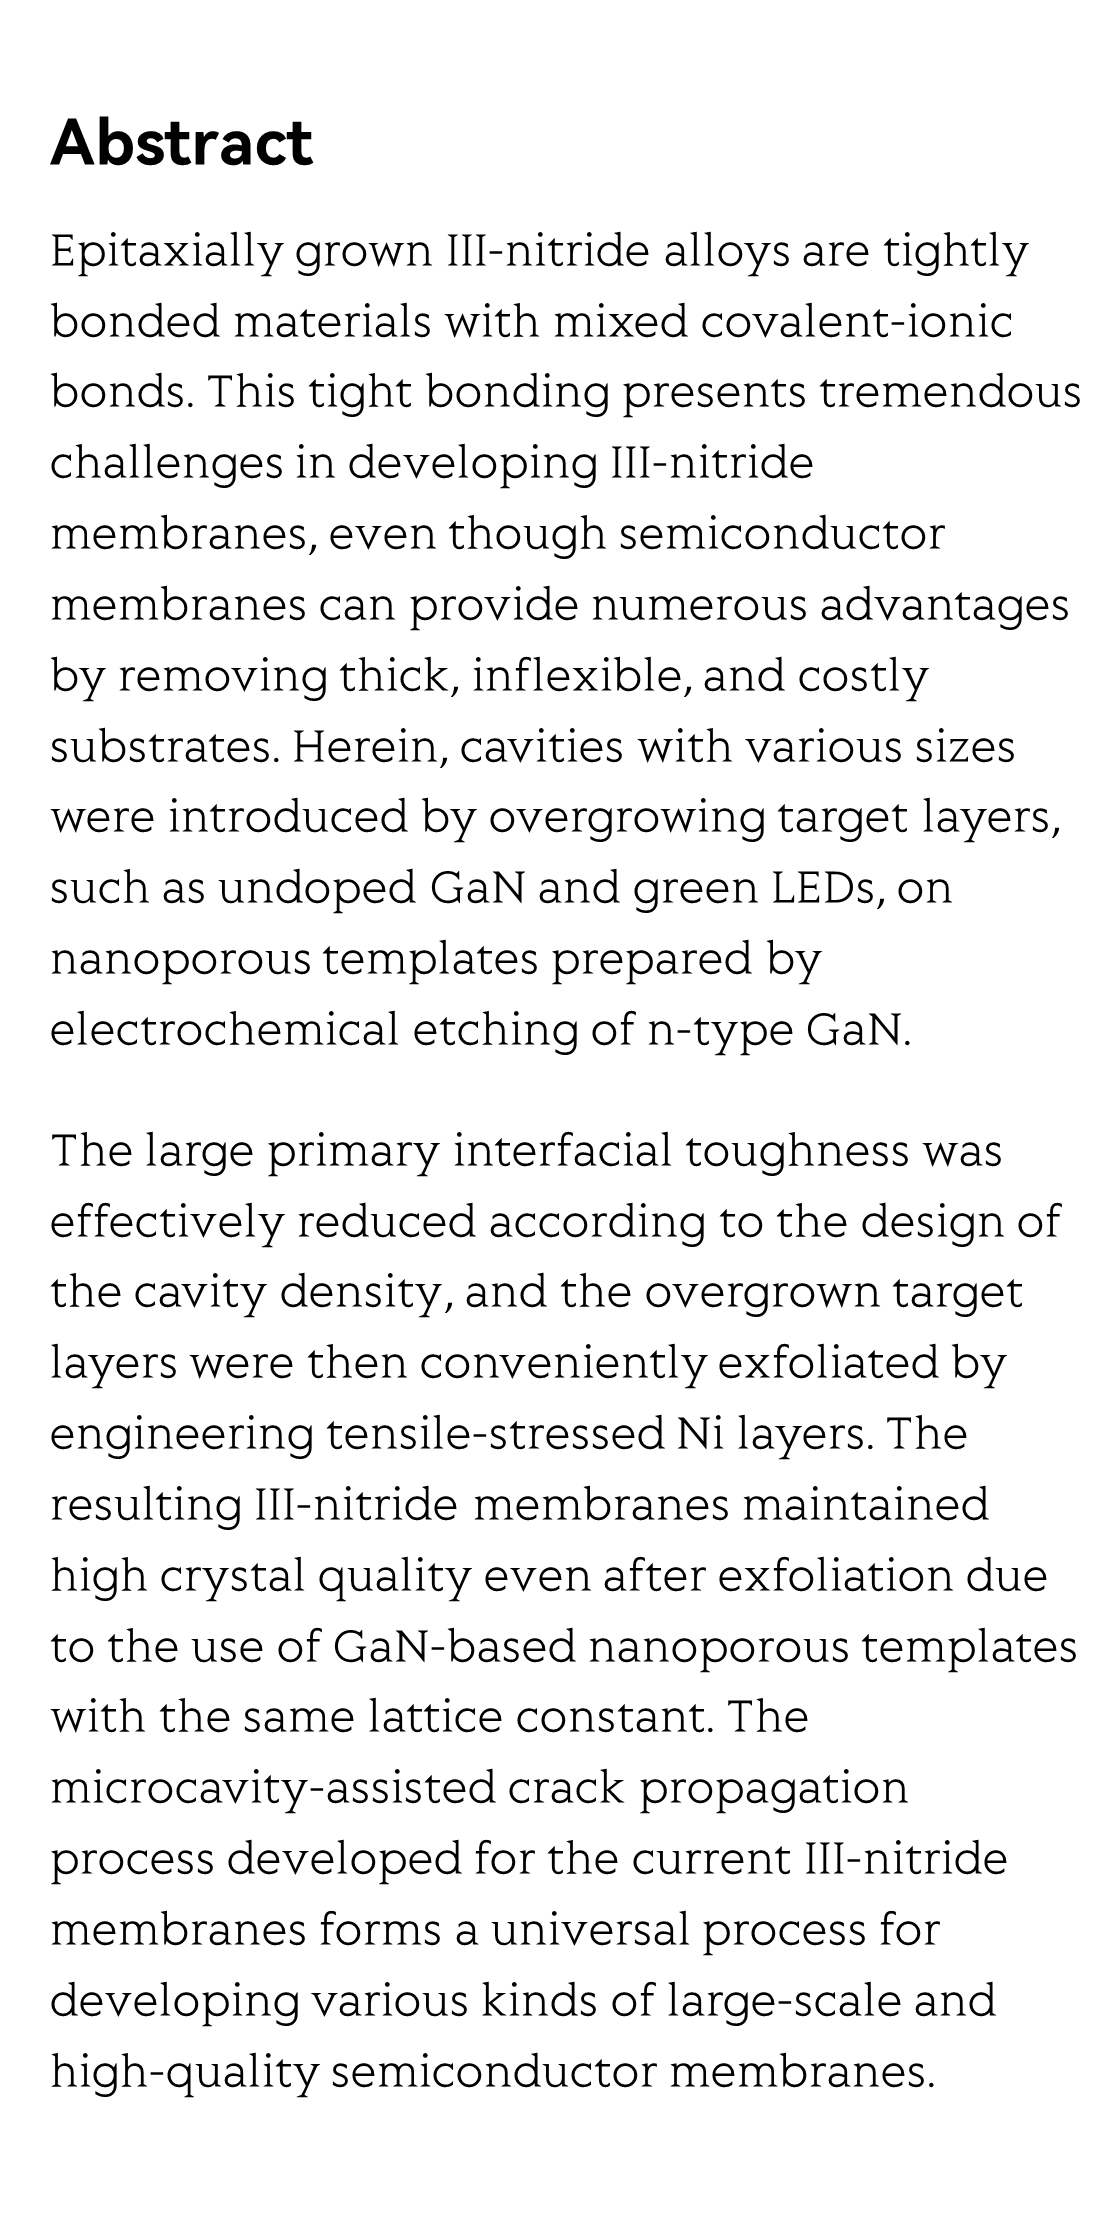 Large-scale and high-quality III-nitride membranes through microcavity-assisted crack propagation by engineering tensile-stressed Ni layers_2